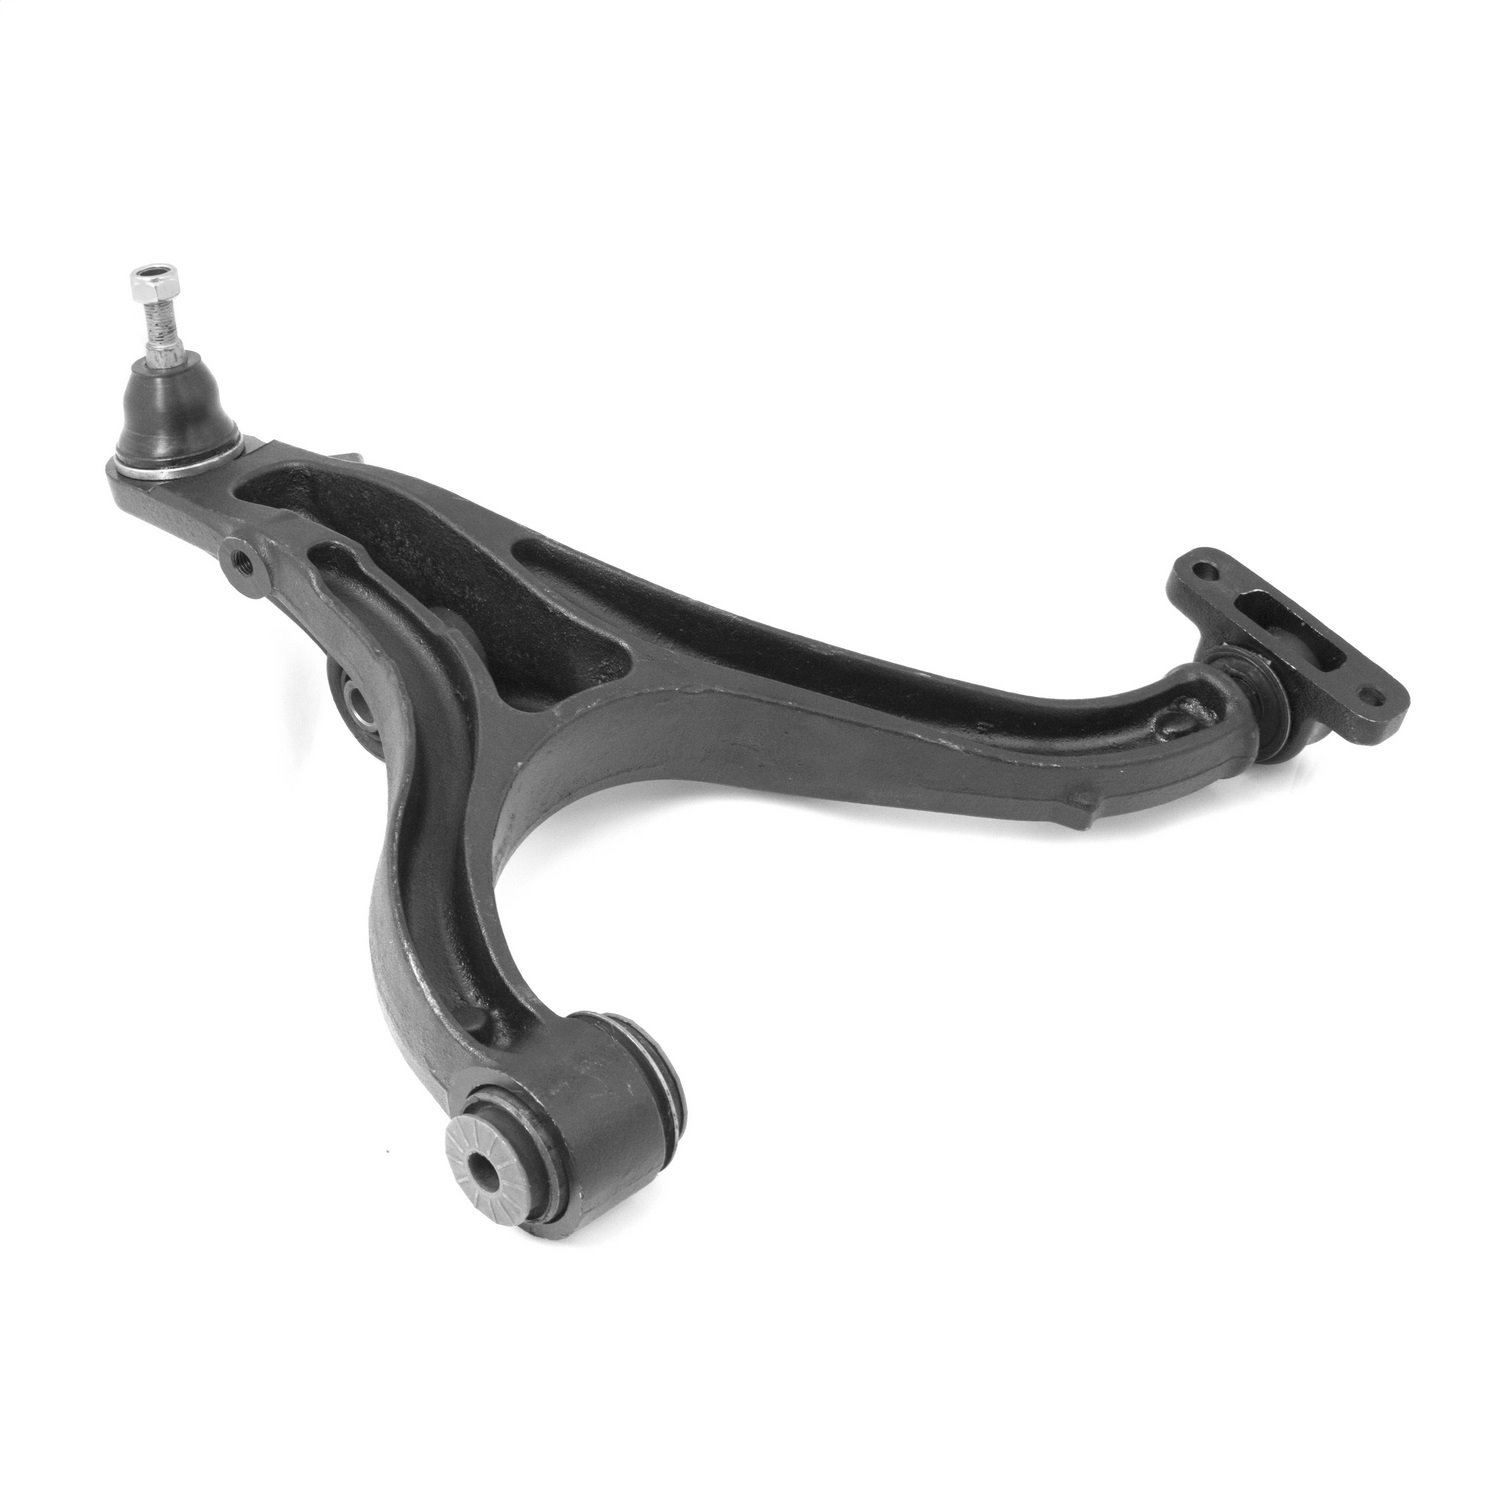 This front lower control arm from Omix-ADA fits the left side on 05-10 Jeep Grand Cherokees and 06-1